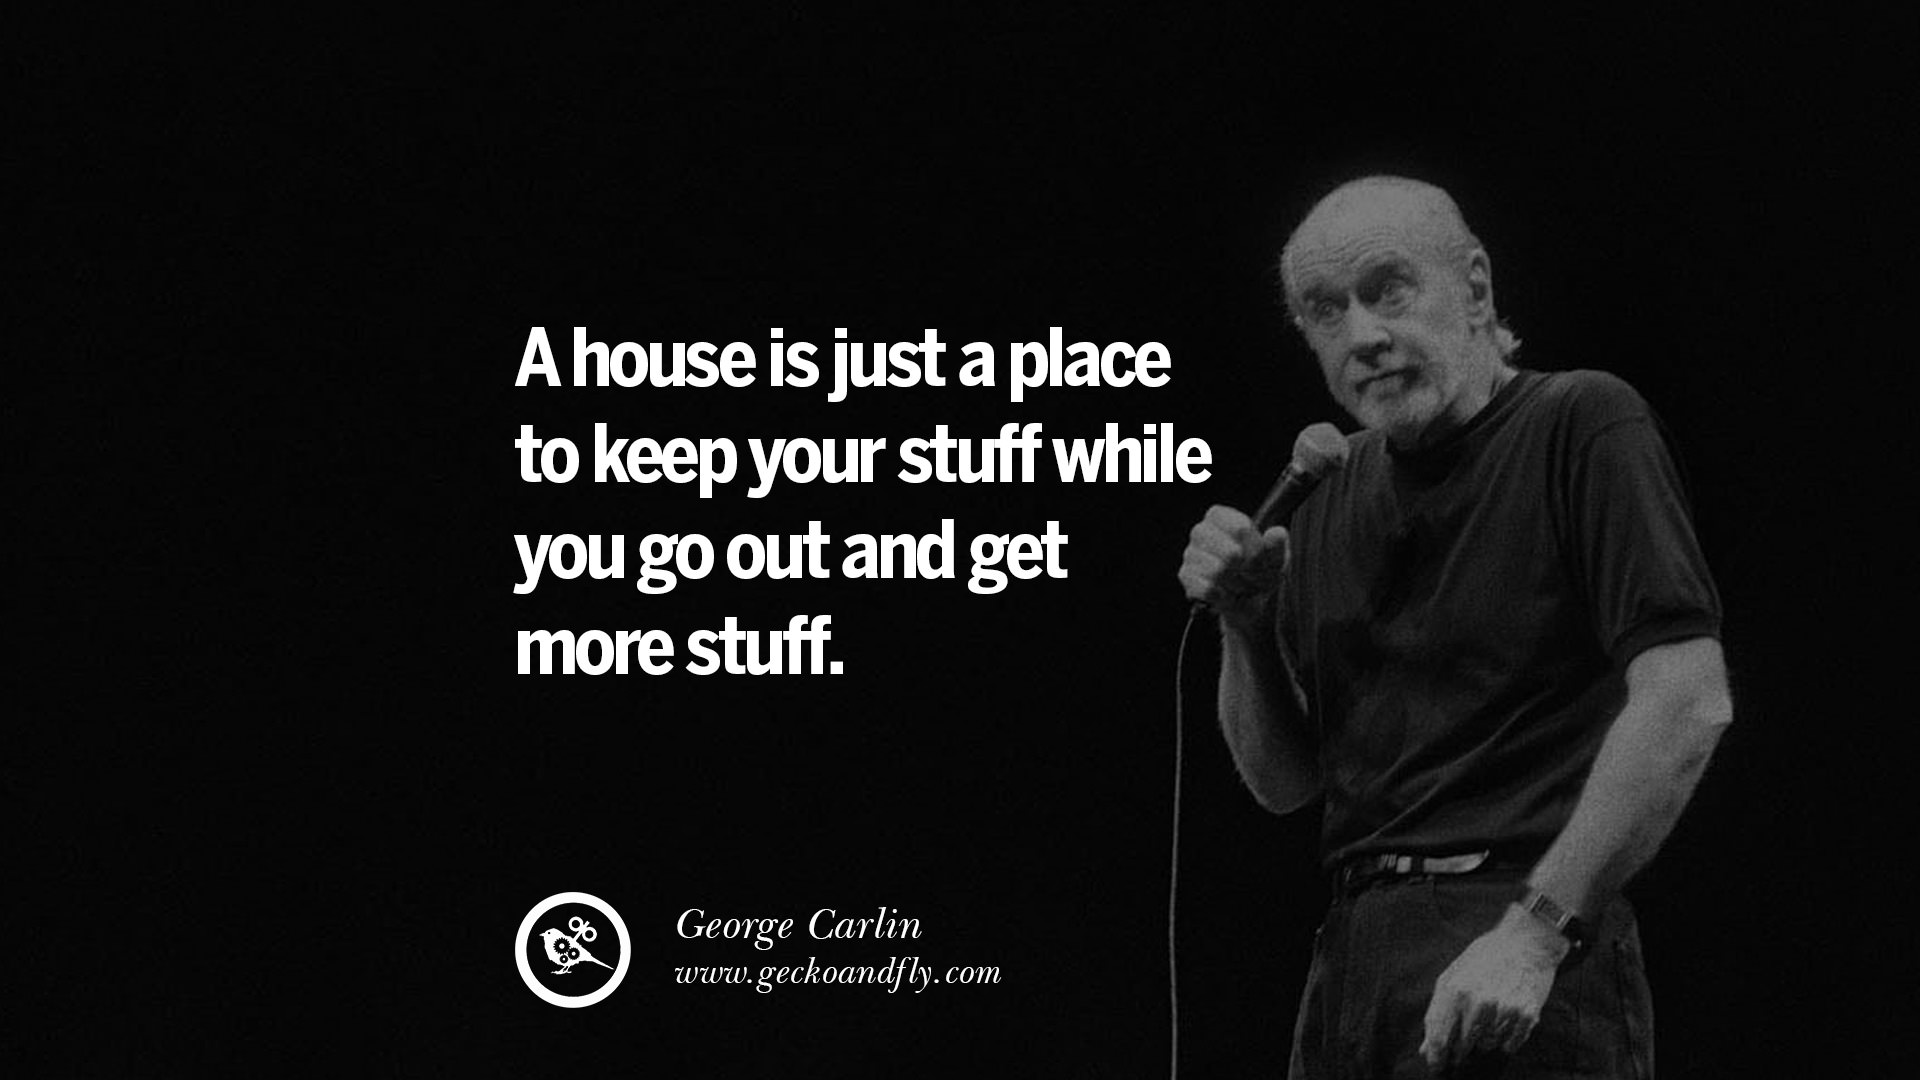 george carlin youtube about stuff